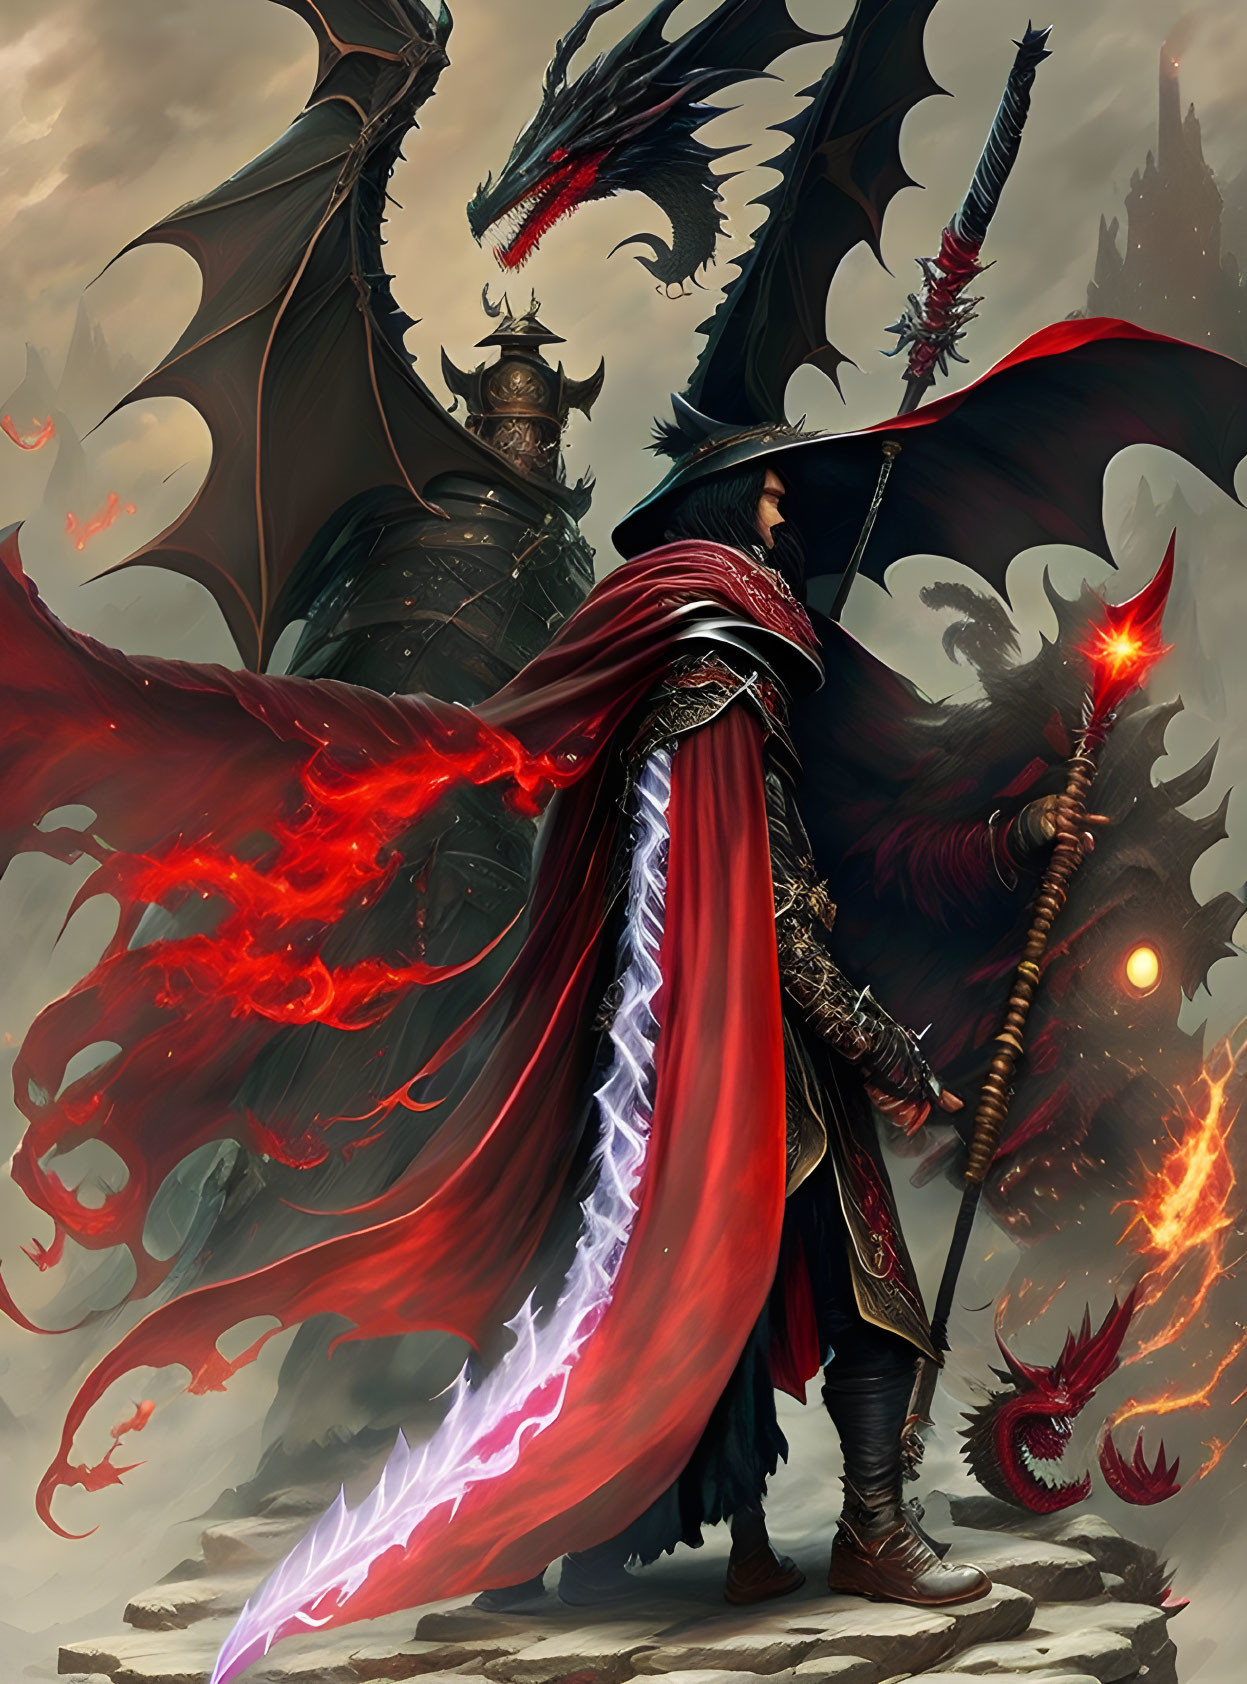 Warrior in red cloak wields glowing sword against colossal dragon